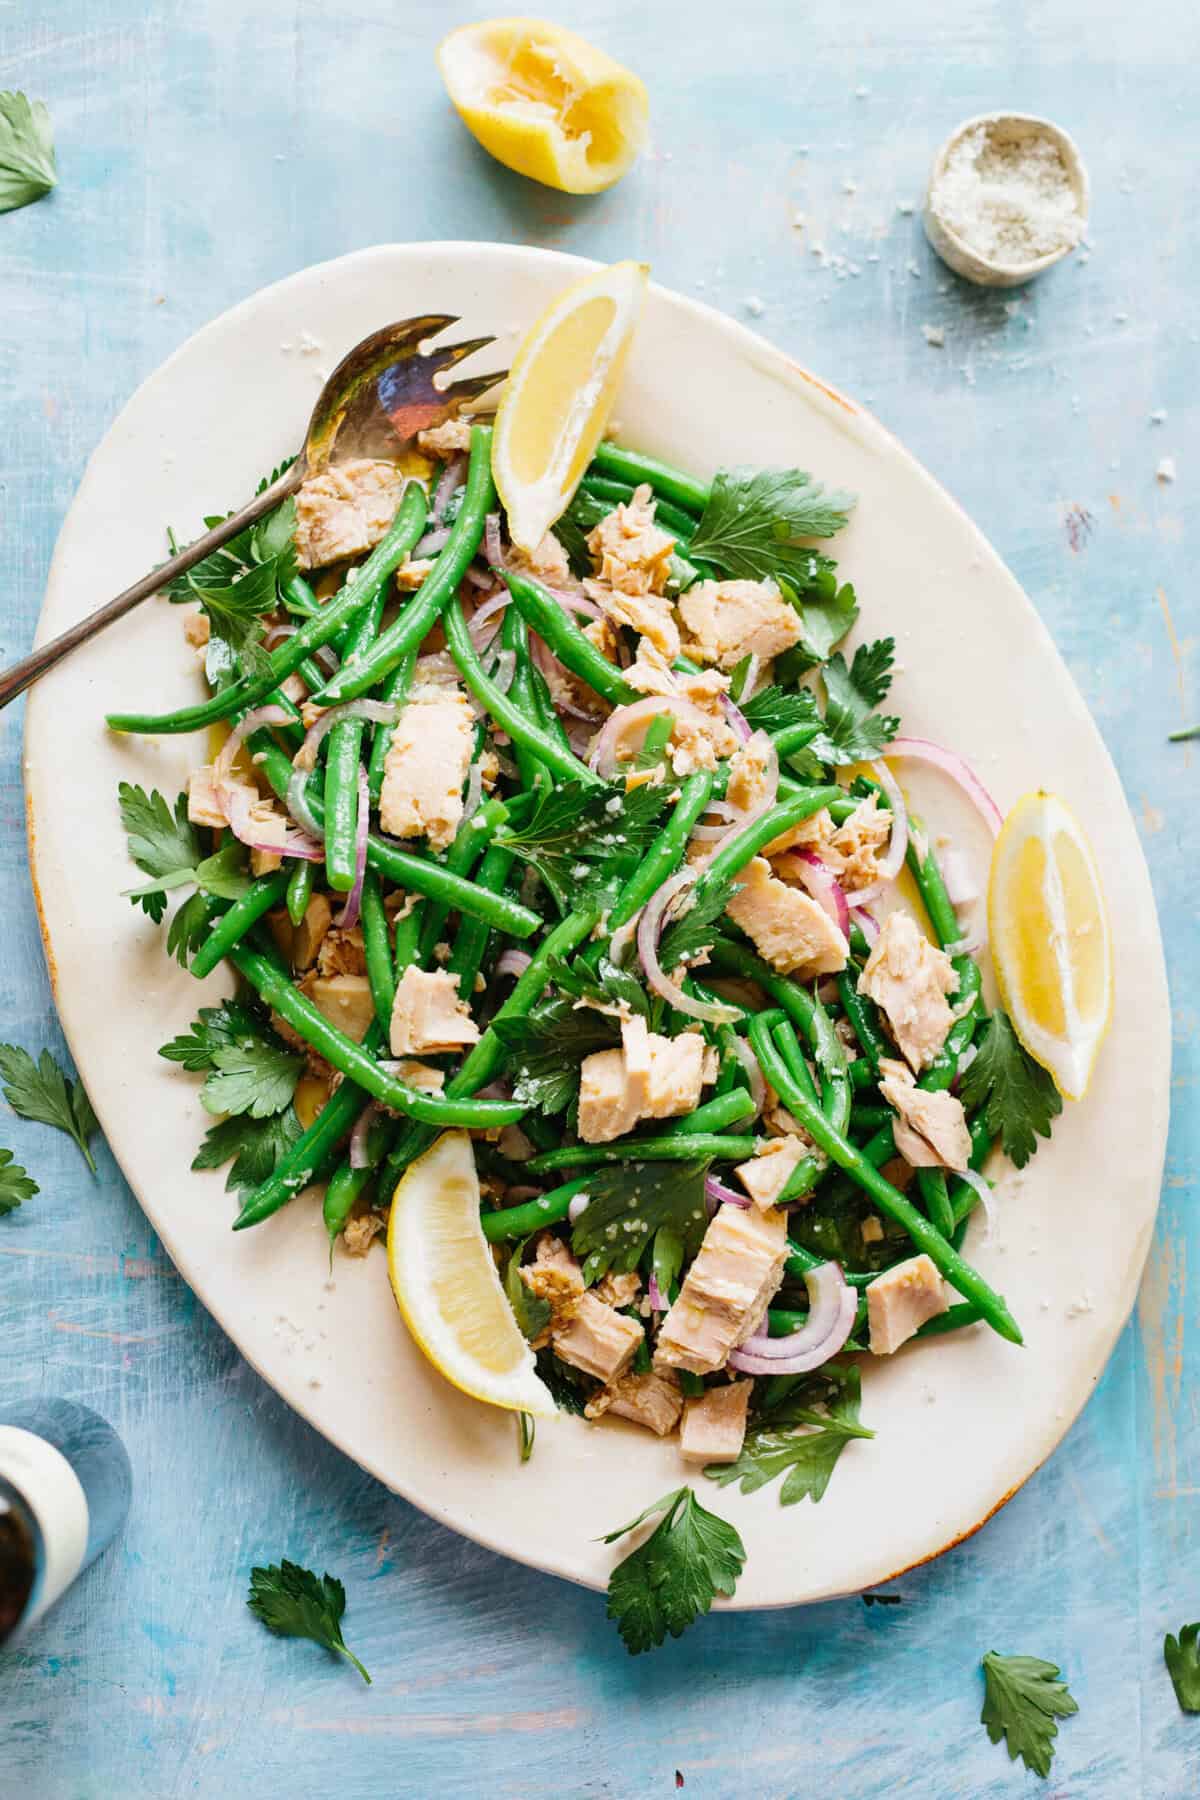 A large platter of Italian tuna salad with green beans, parsley and lemon with a serving fork.